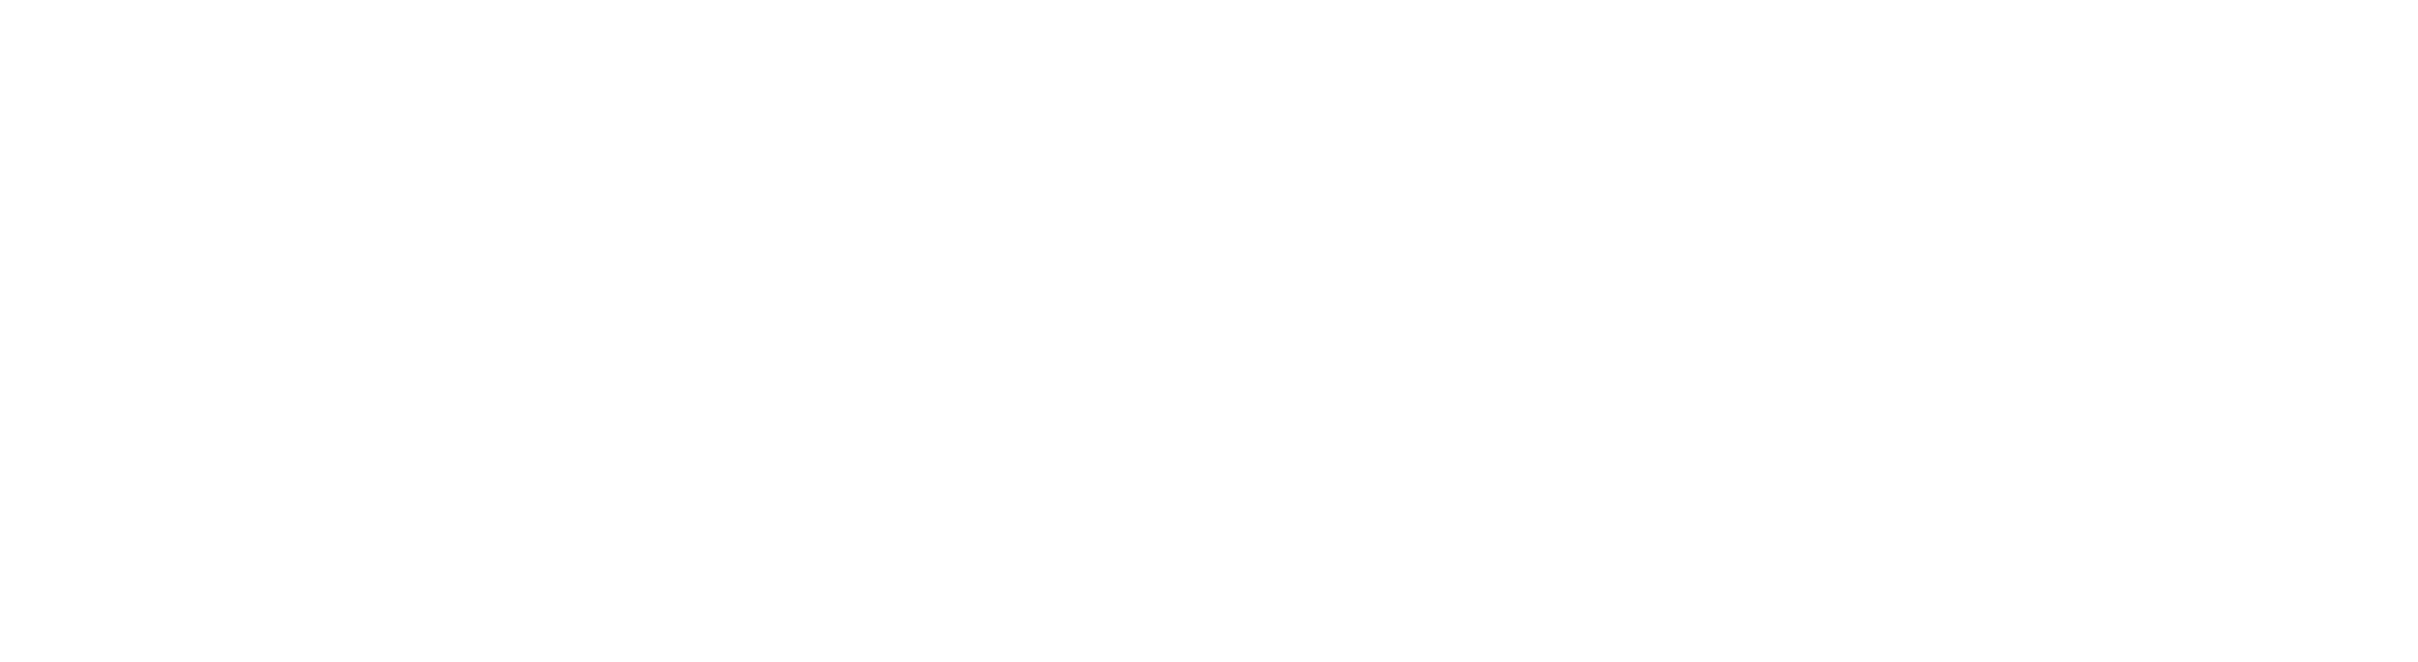 document assembly software for lawyers